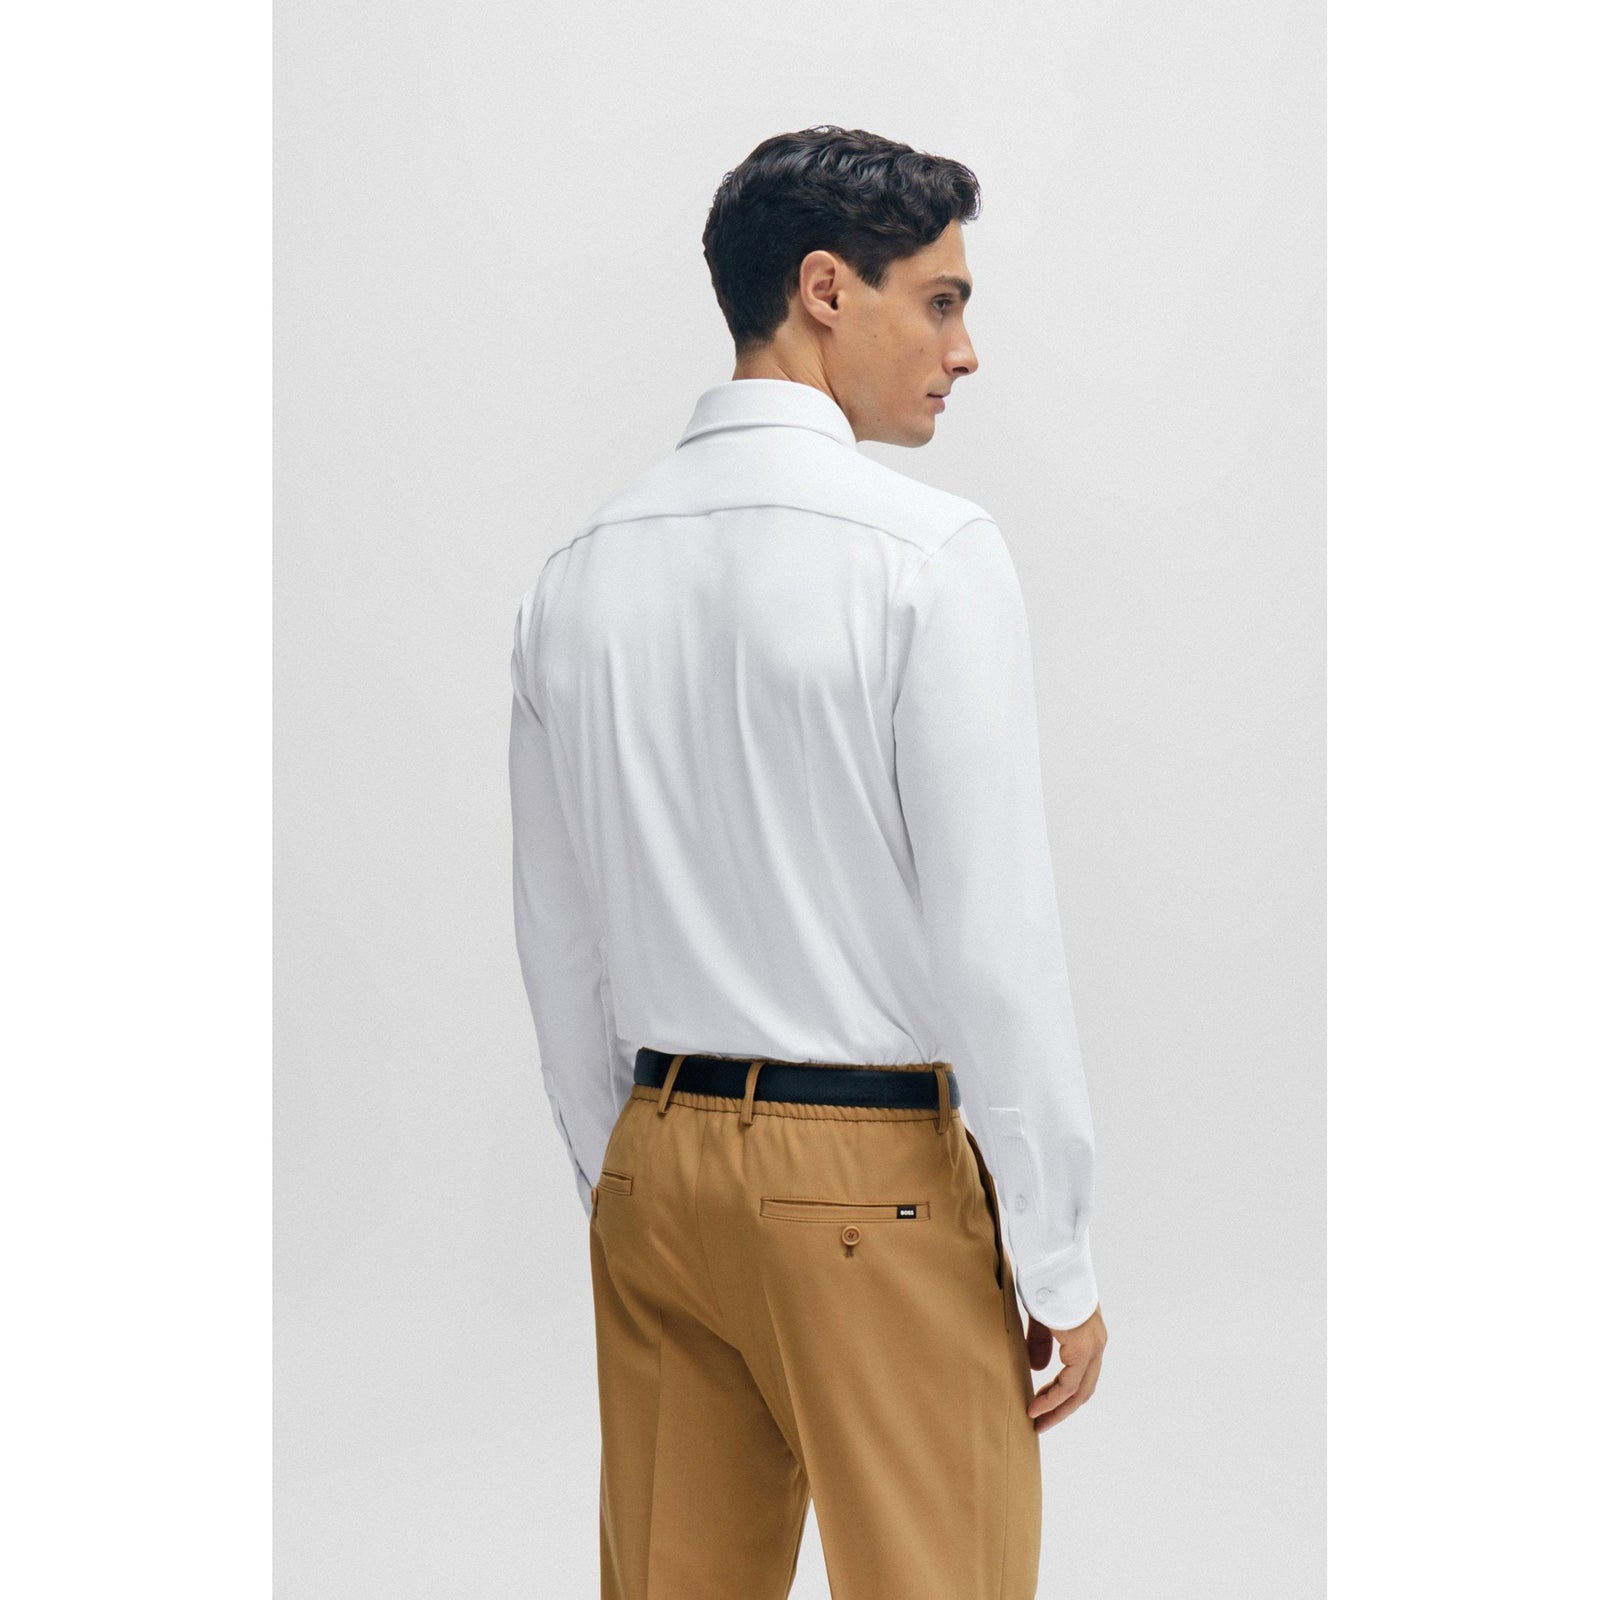 BOSS SLIM FIT SHIRT IN HIGH PERFORMANCE STRETCH FABRIC - Yooto